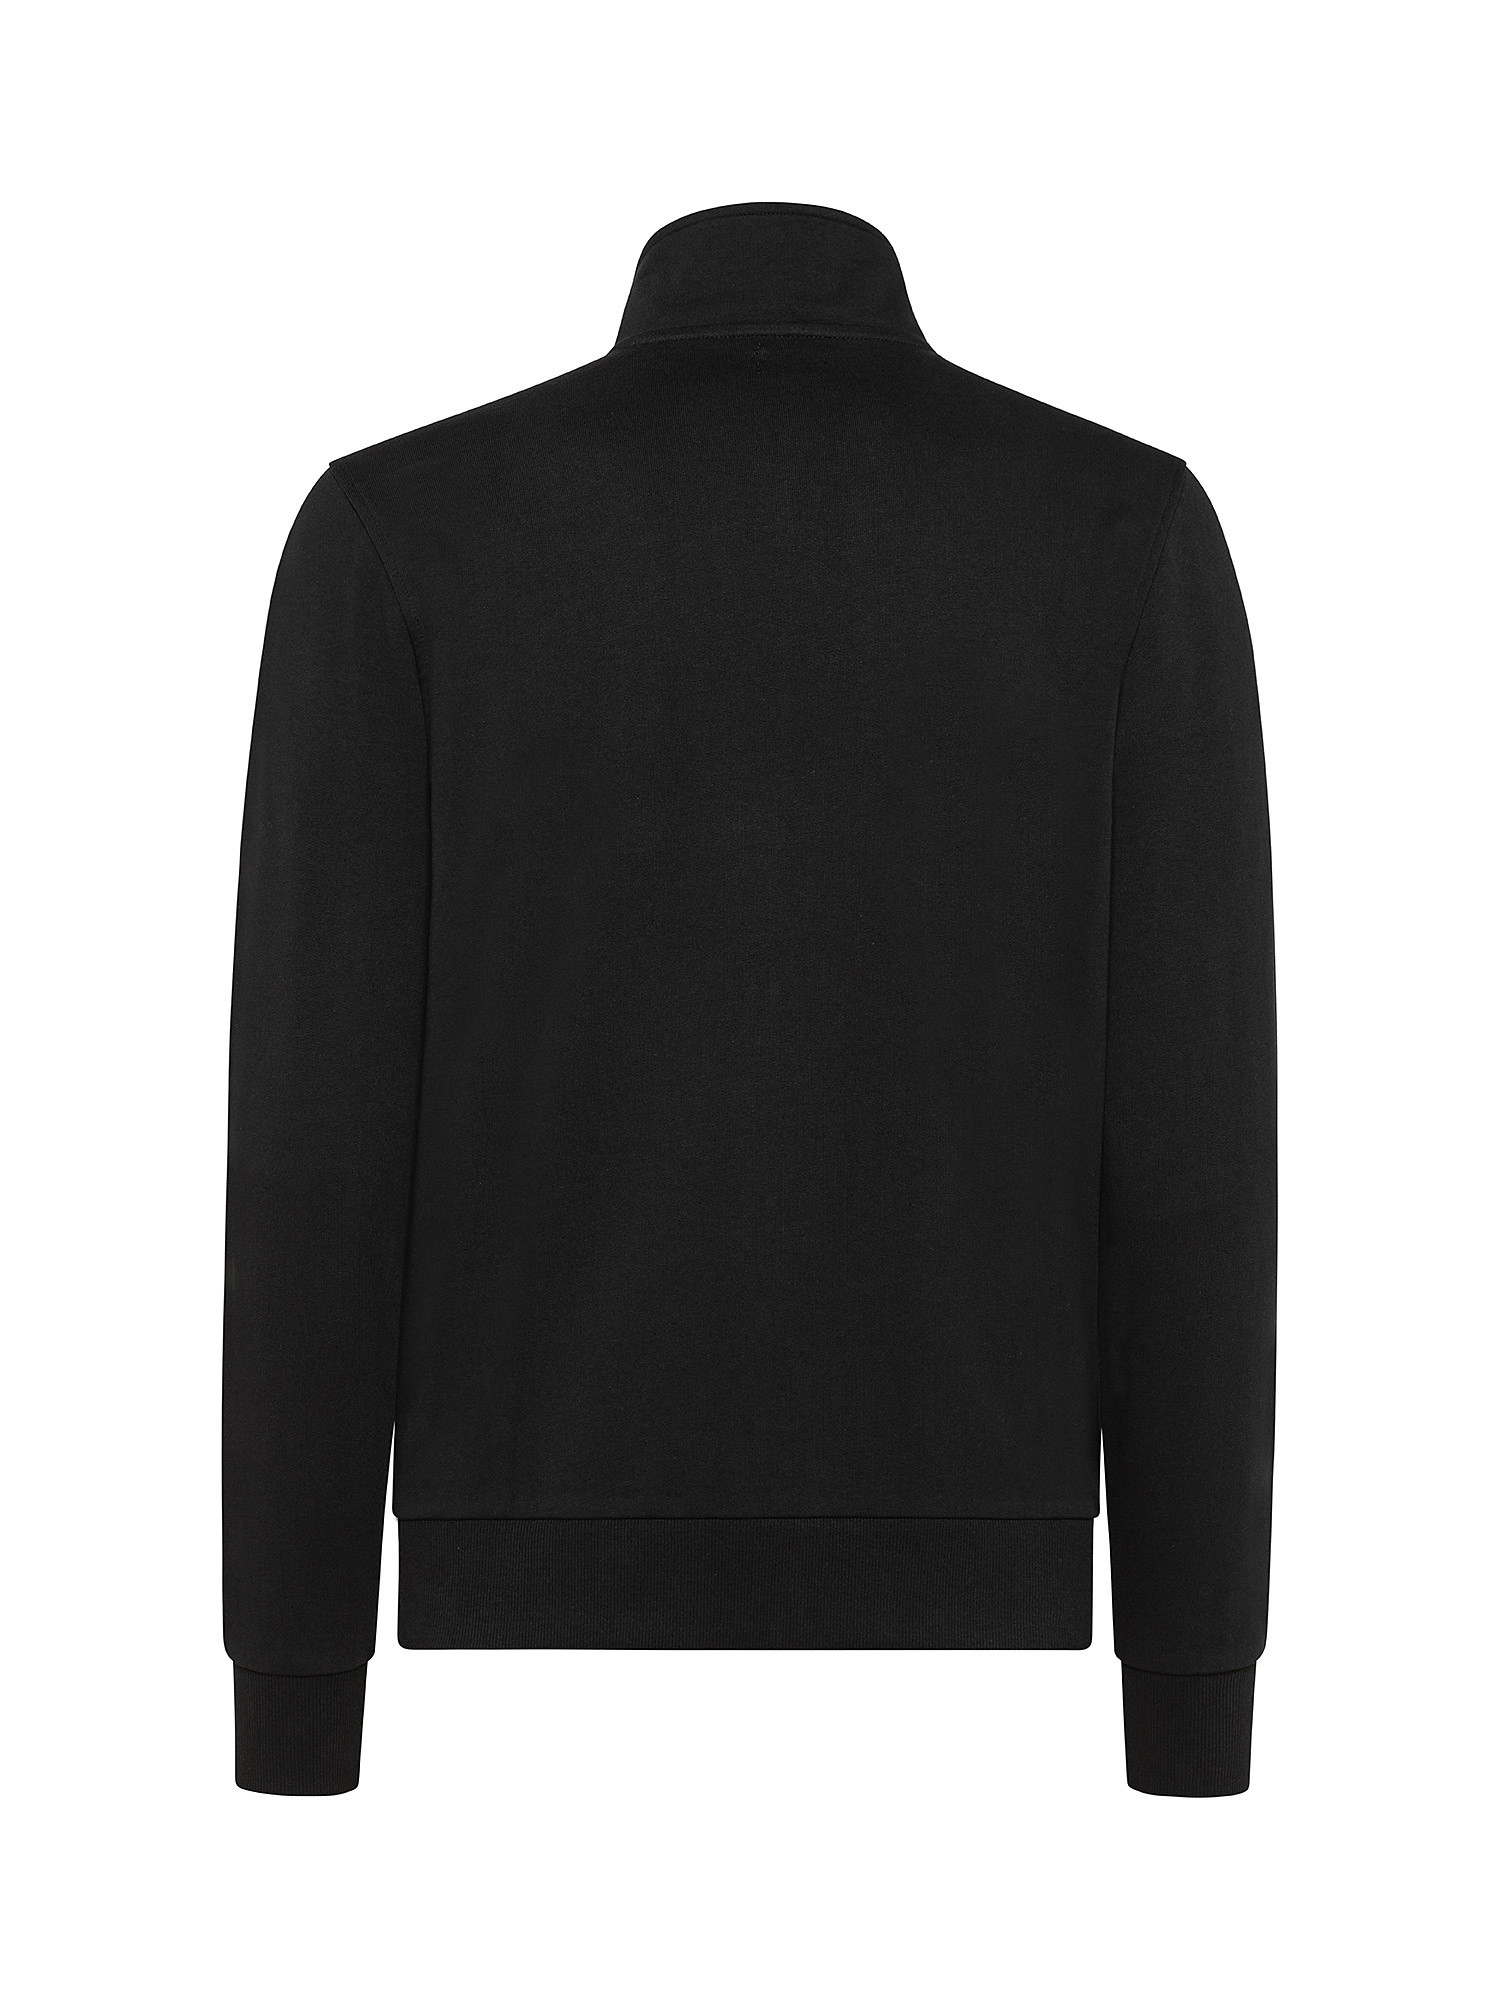 Sweatshirt with zip, Anthracite, large image number 1